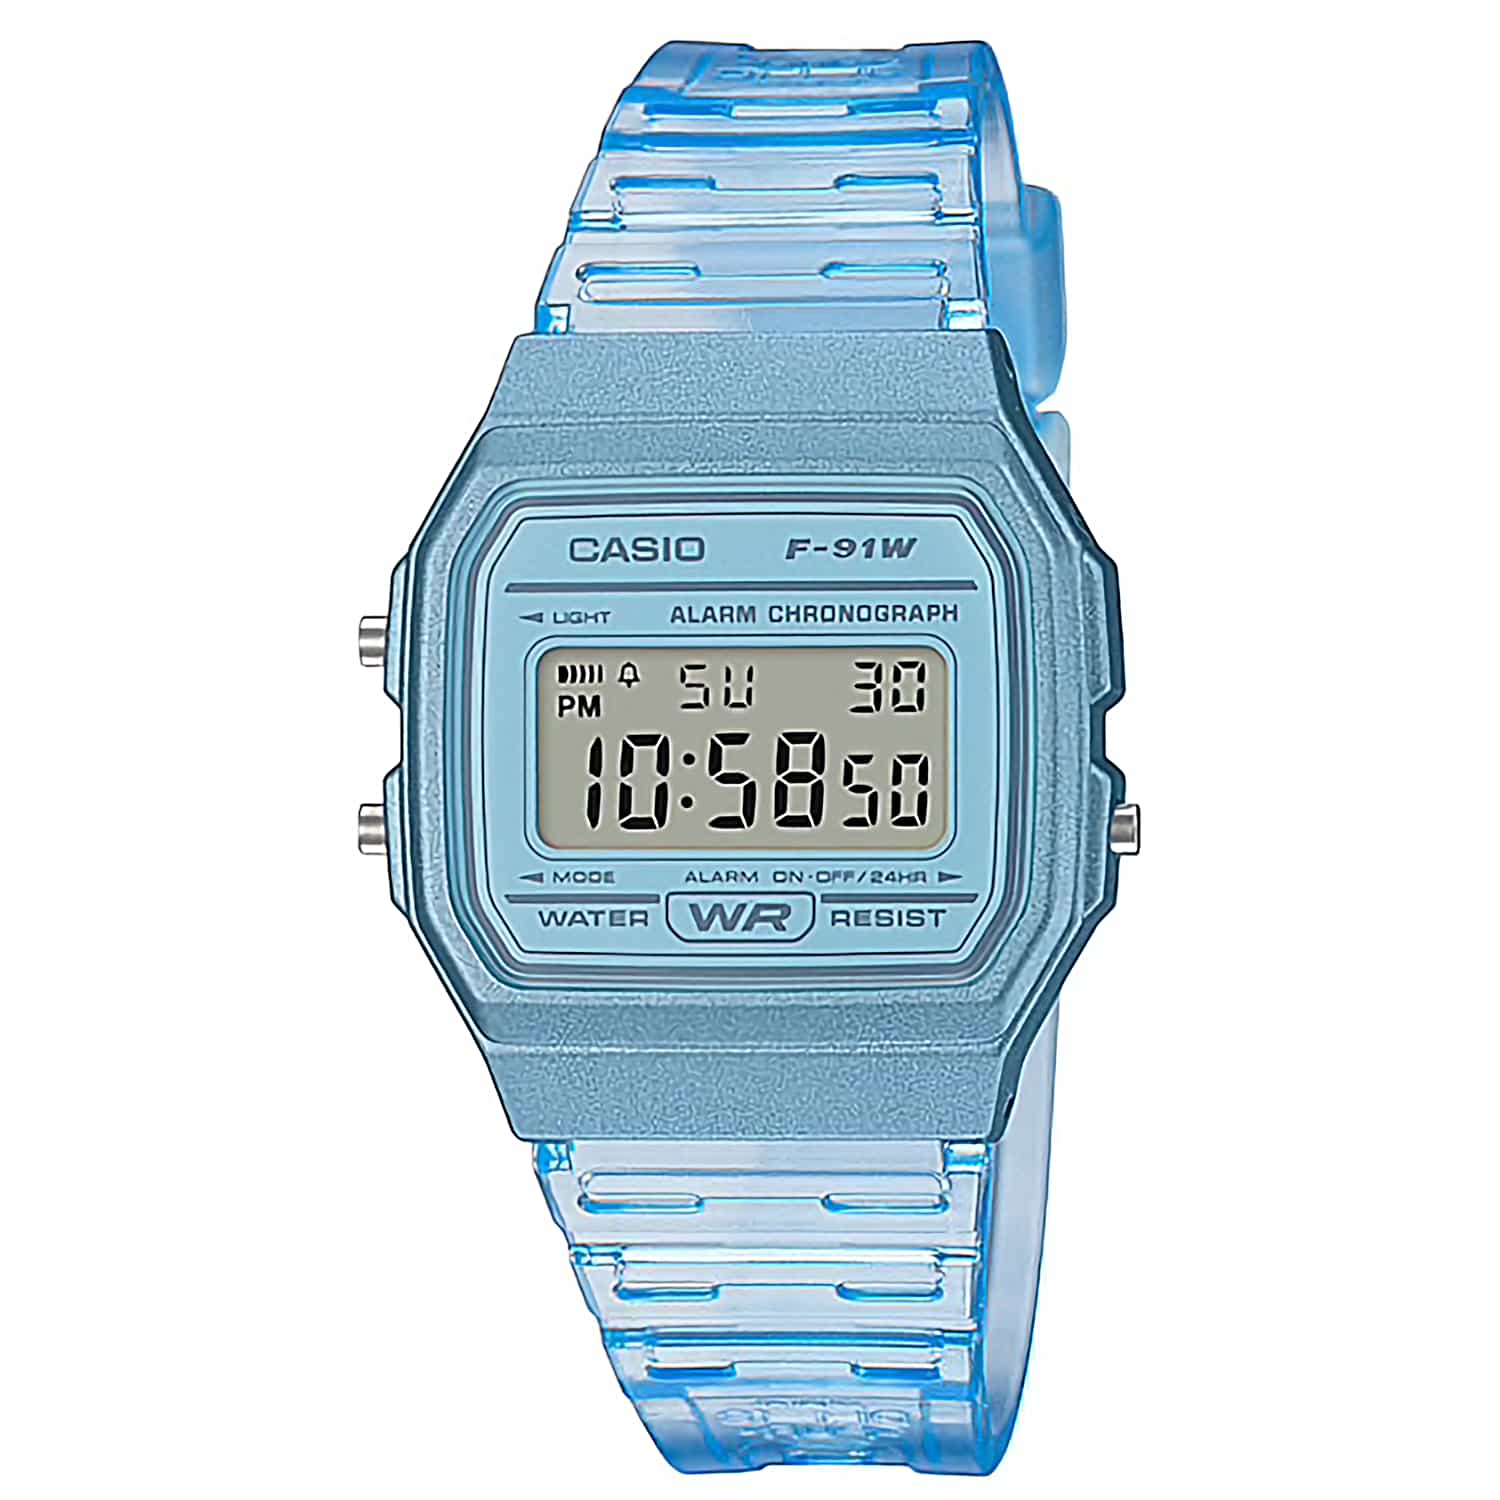 F91WS-2 Casio Digital Watch.   A long time favourite Casio Digital Watch   Afterpay - Split your purchase into 4 instalments - Pay for your purchase over 4 instalments, due every two weeks. You’ll pay your first insta where to buy michael kors watches